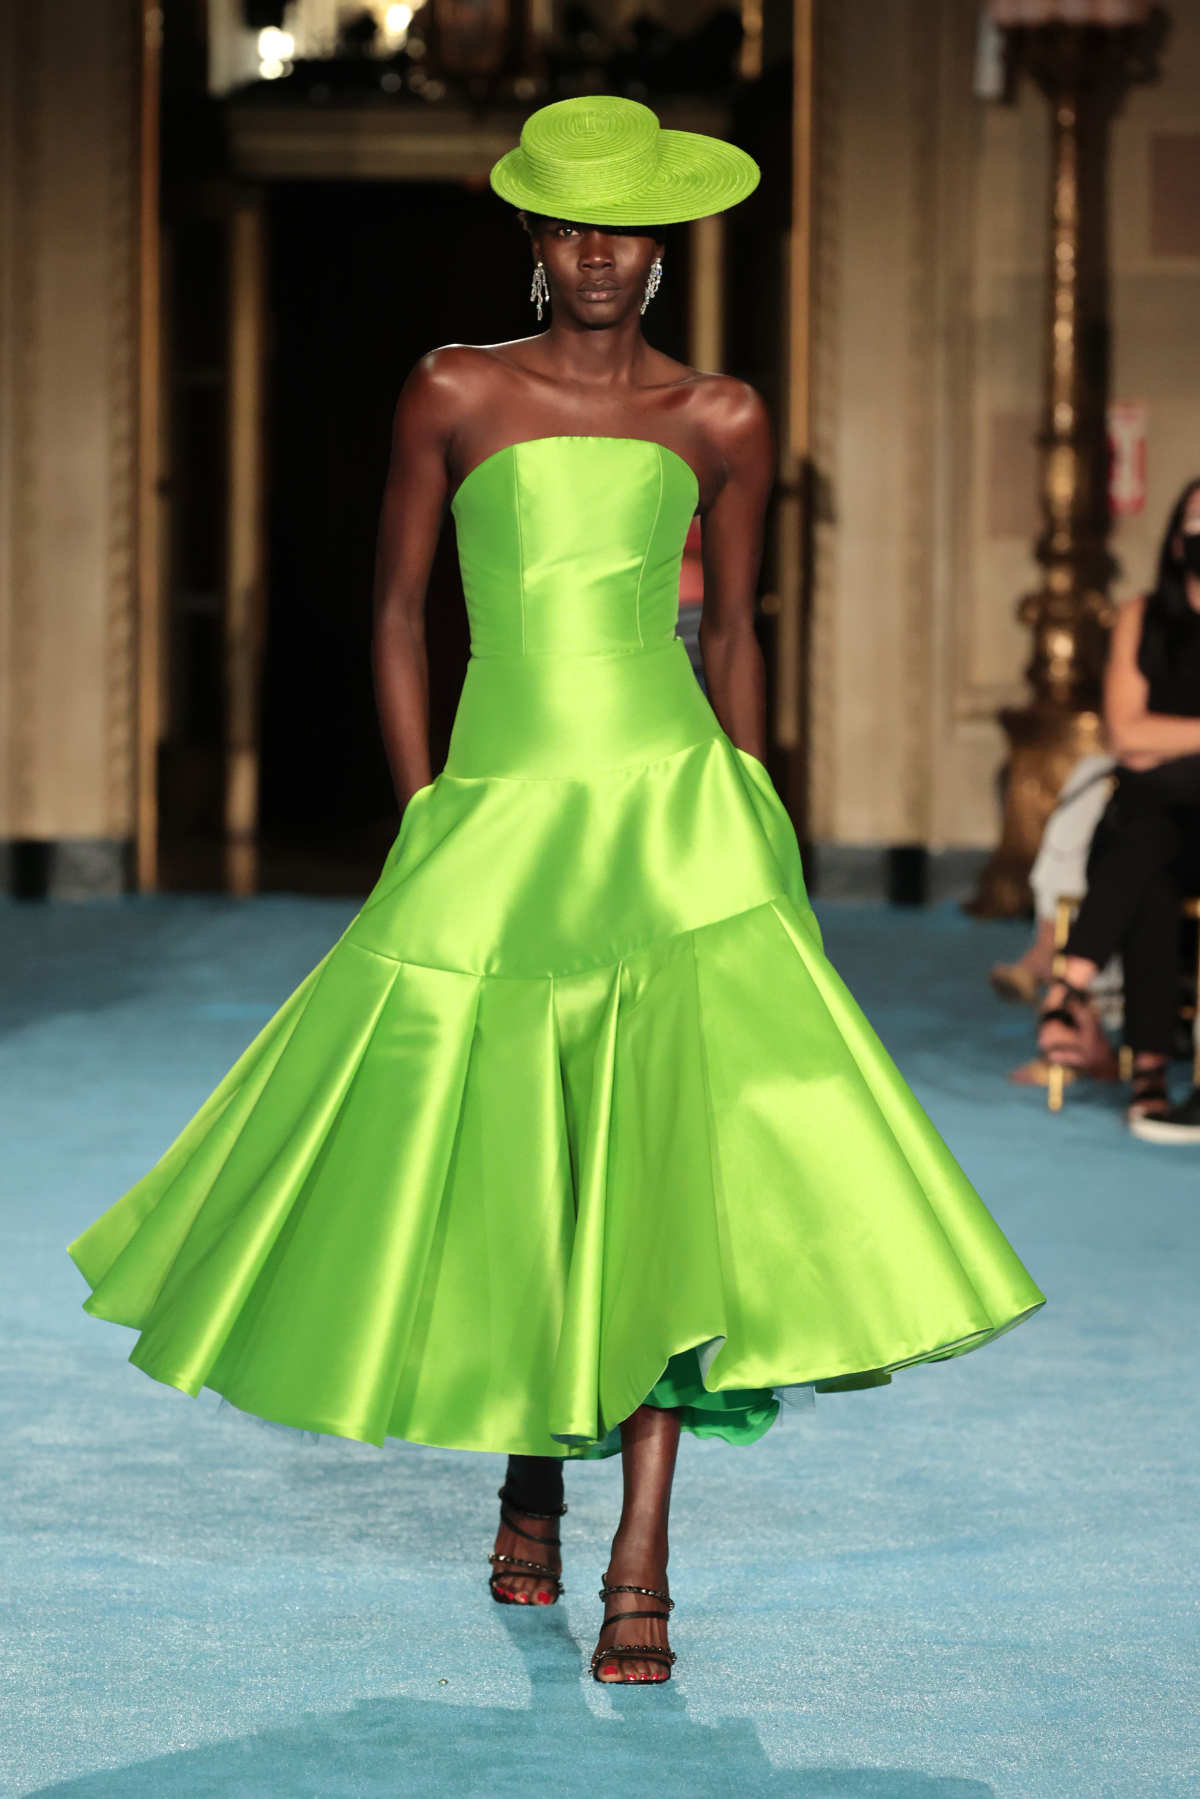 Christian Siriano Presents Its New Spring/Summer 2022 Collection